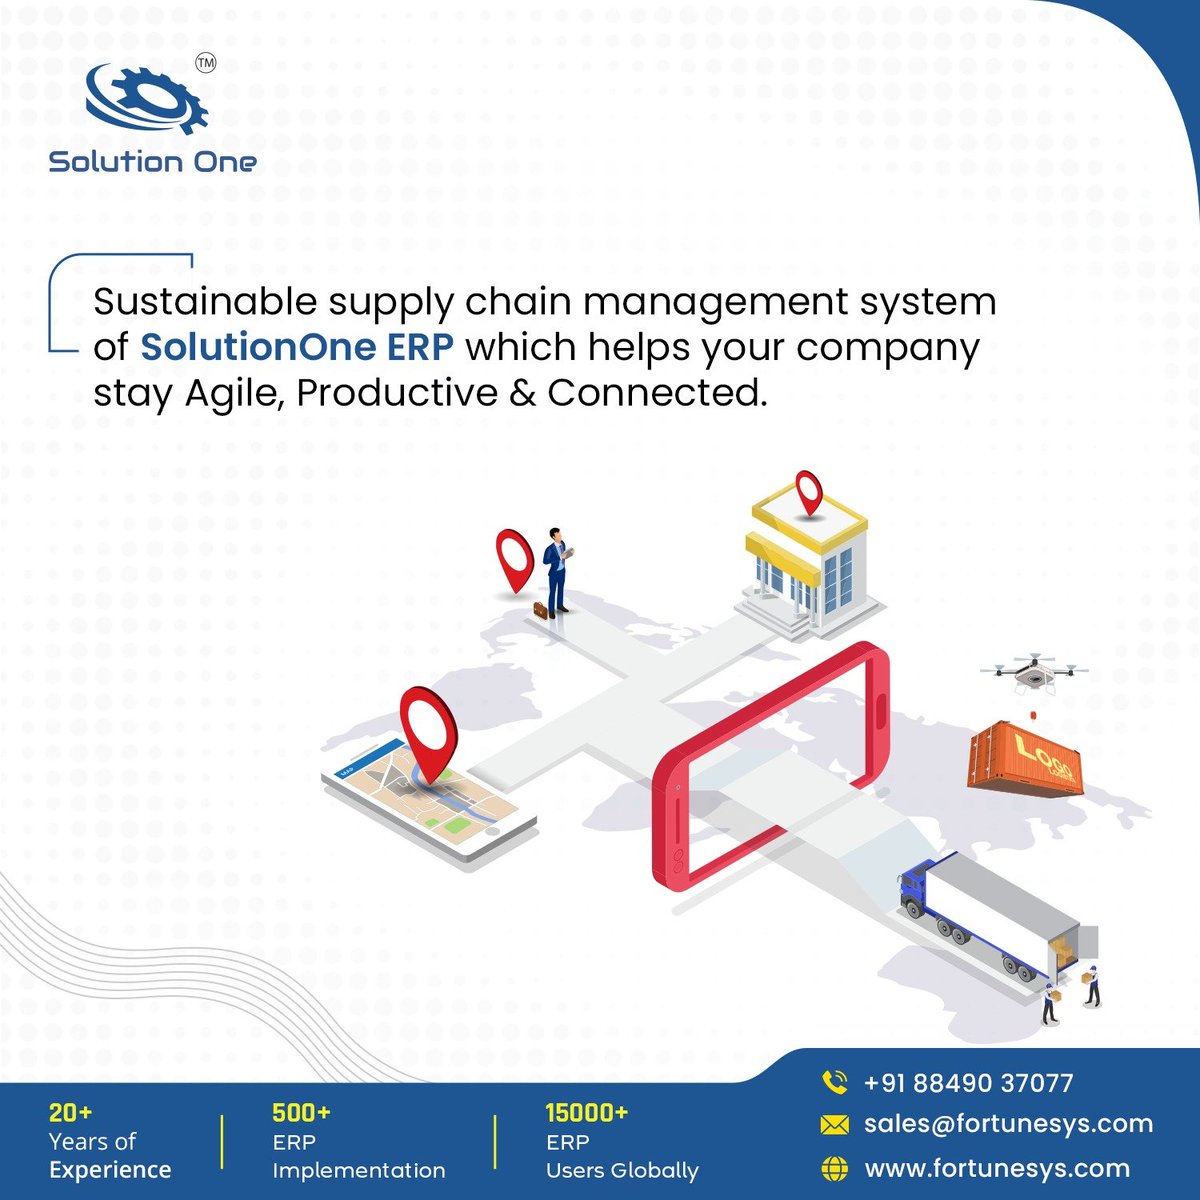 'Discover the intersection of sustainability and business efficiency with SolutionOne ERP. 
.
.
.
#SustainableSolutions #AgileBusiness #ProductivityBoost #ConnectedEnterprise #EcoFriendlyBusiness #EfficientSupplyChain #DigitalConnectivity #BusinessSustainability